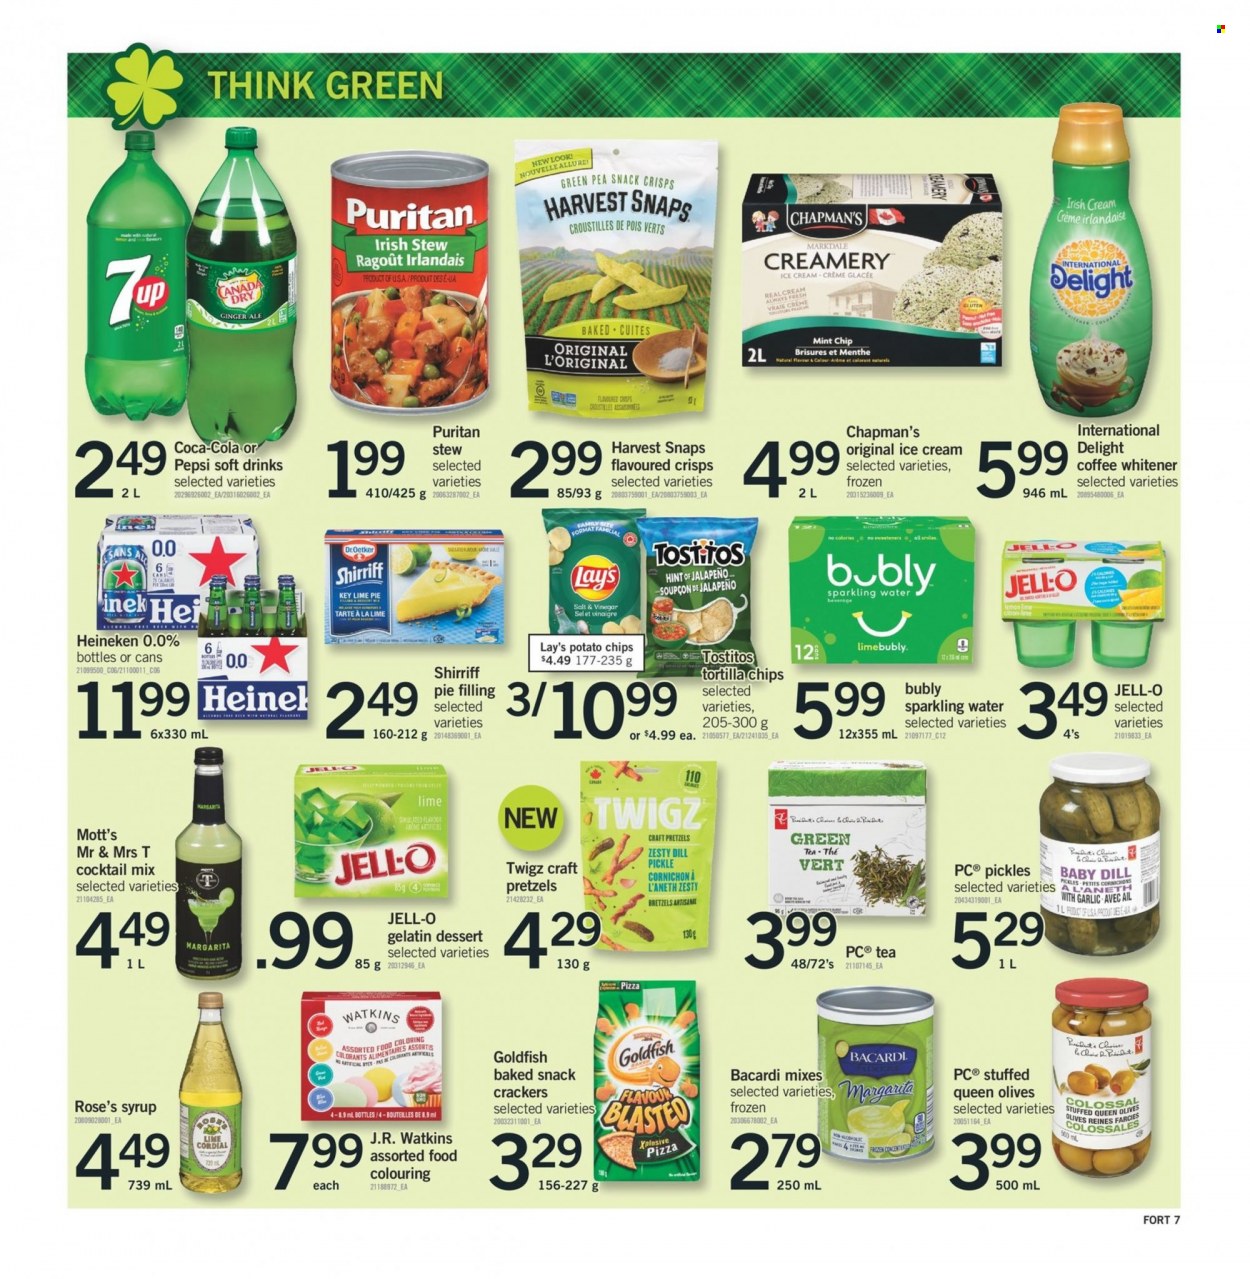 thumbnail - Fortinos Flyer - March 16, 2023 - March 22, 2023 - Sales products - pretzels, jalapeño, Mott's, pizza, Dr. Oetker, Président, coffee whitener, ice cream, snack, crackers, dill pickle, tortilla chips, potato chips, Lay’s, Goldfish, Tostitos, pie filling, Jell-O, Harvest Snaps, pickles, dill, syrup, Coca-Cola, ginger ale, Pepsi, soft drink, 7UP, sparkling water, water, green tea, tea, Bacardi, irish cream, beer, Heineken, olives. Page 8.